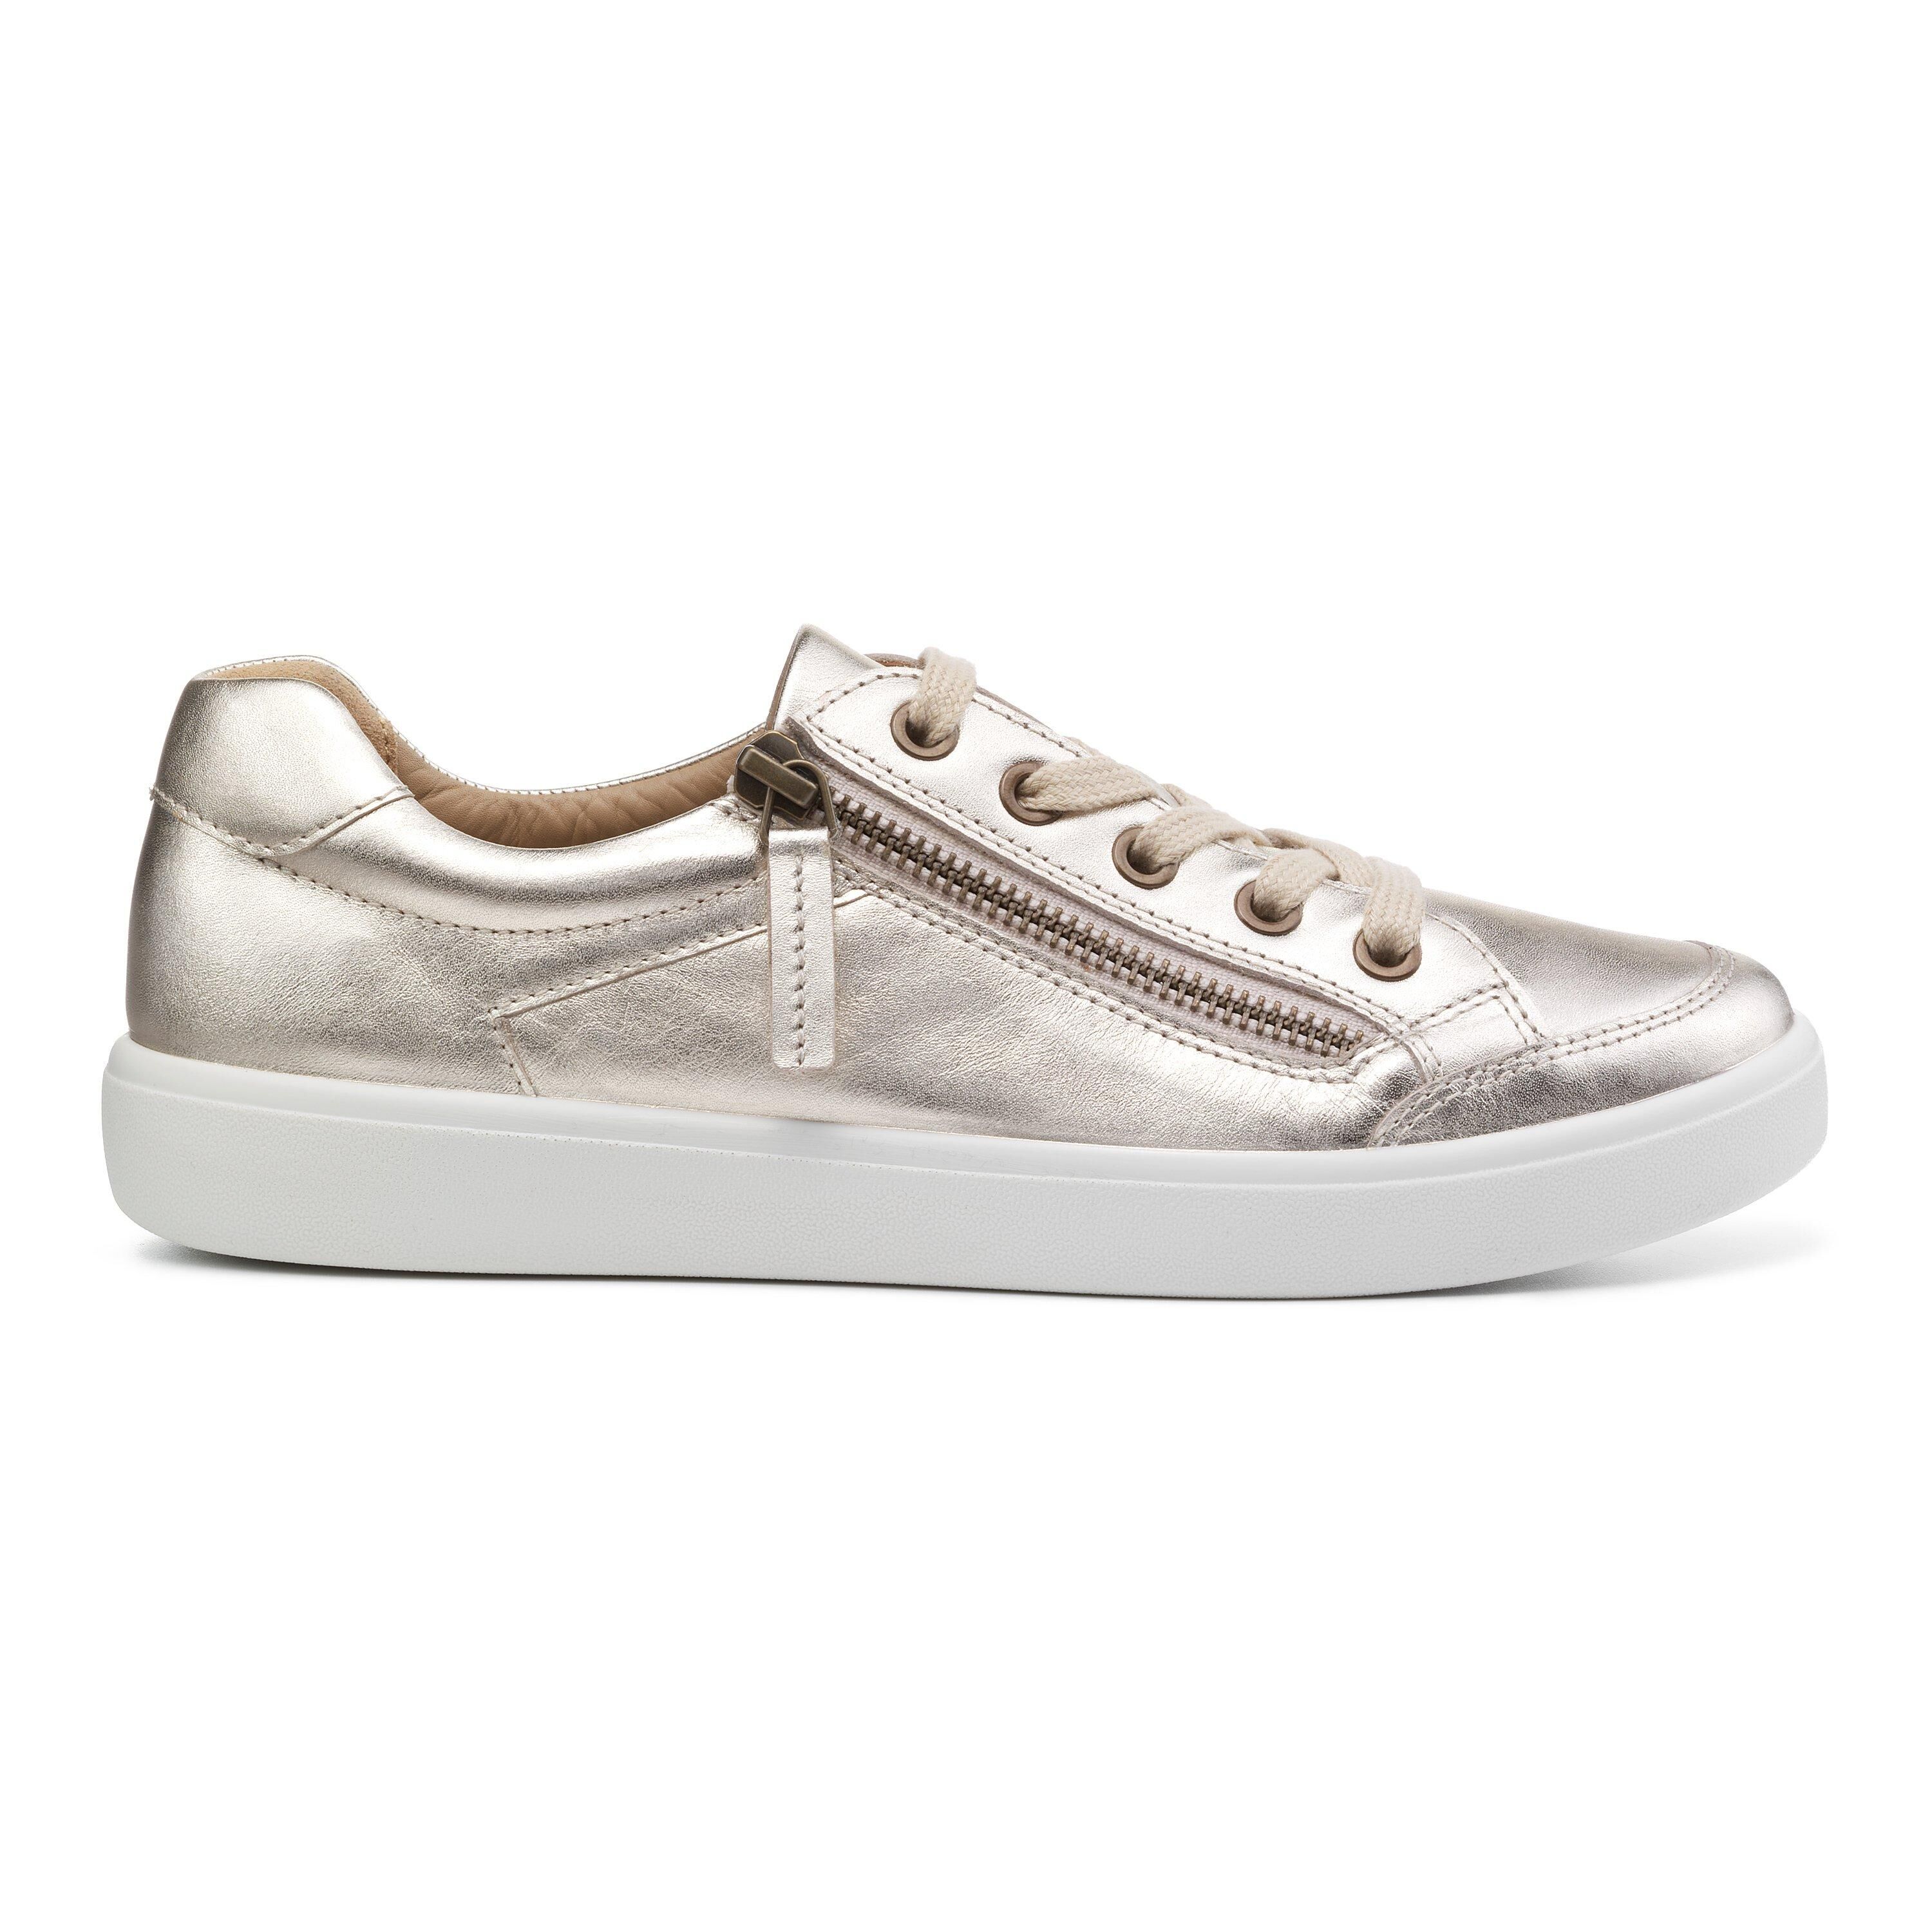 Hotter Chase II Shoes - Soft Gold Standard Fit 11 female